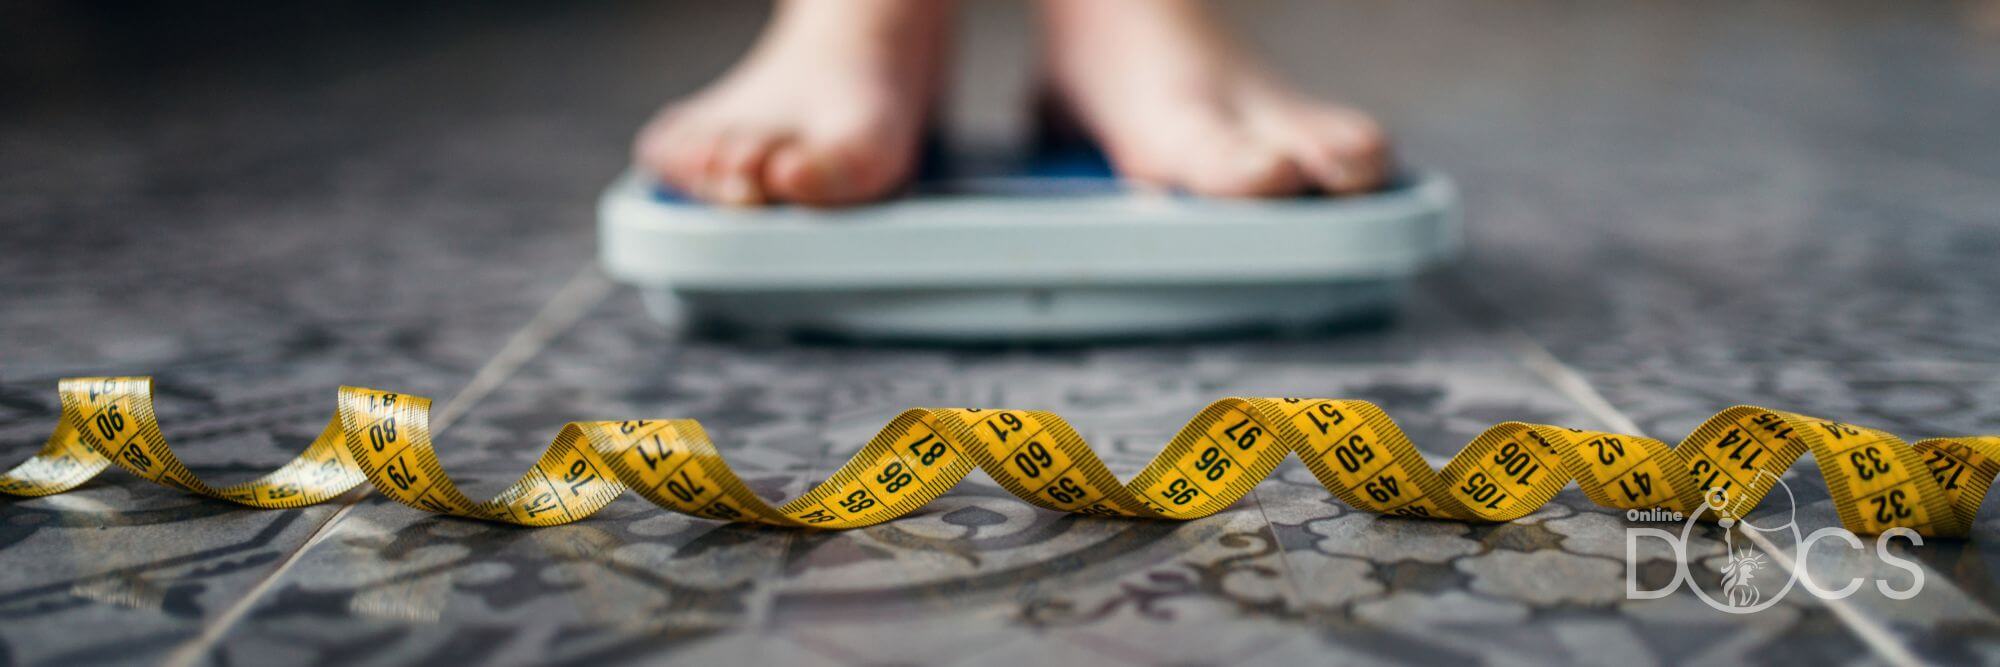 Eating Disorders: Types, Warning Signs, and Treatments